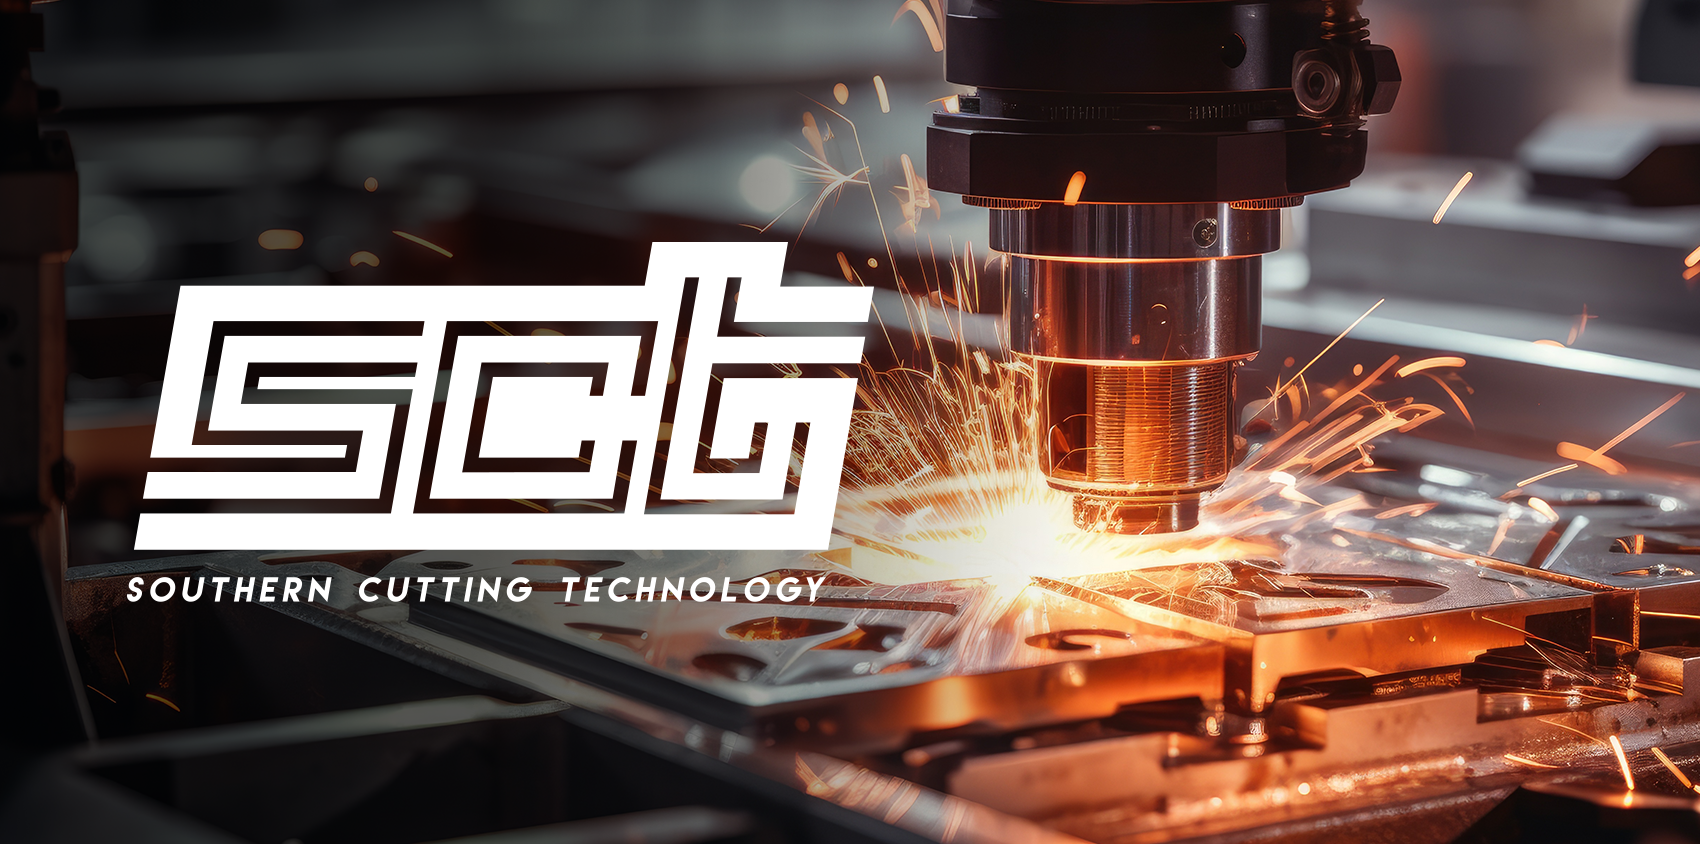 southern cutting technology case study banner